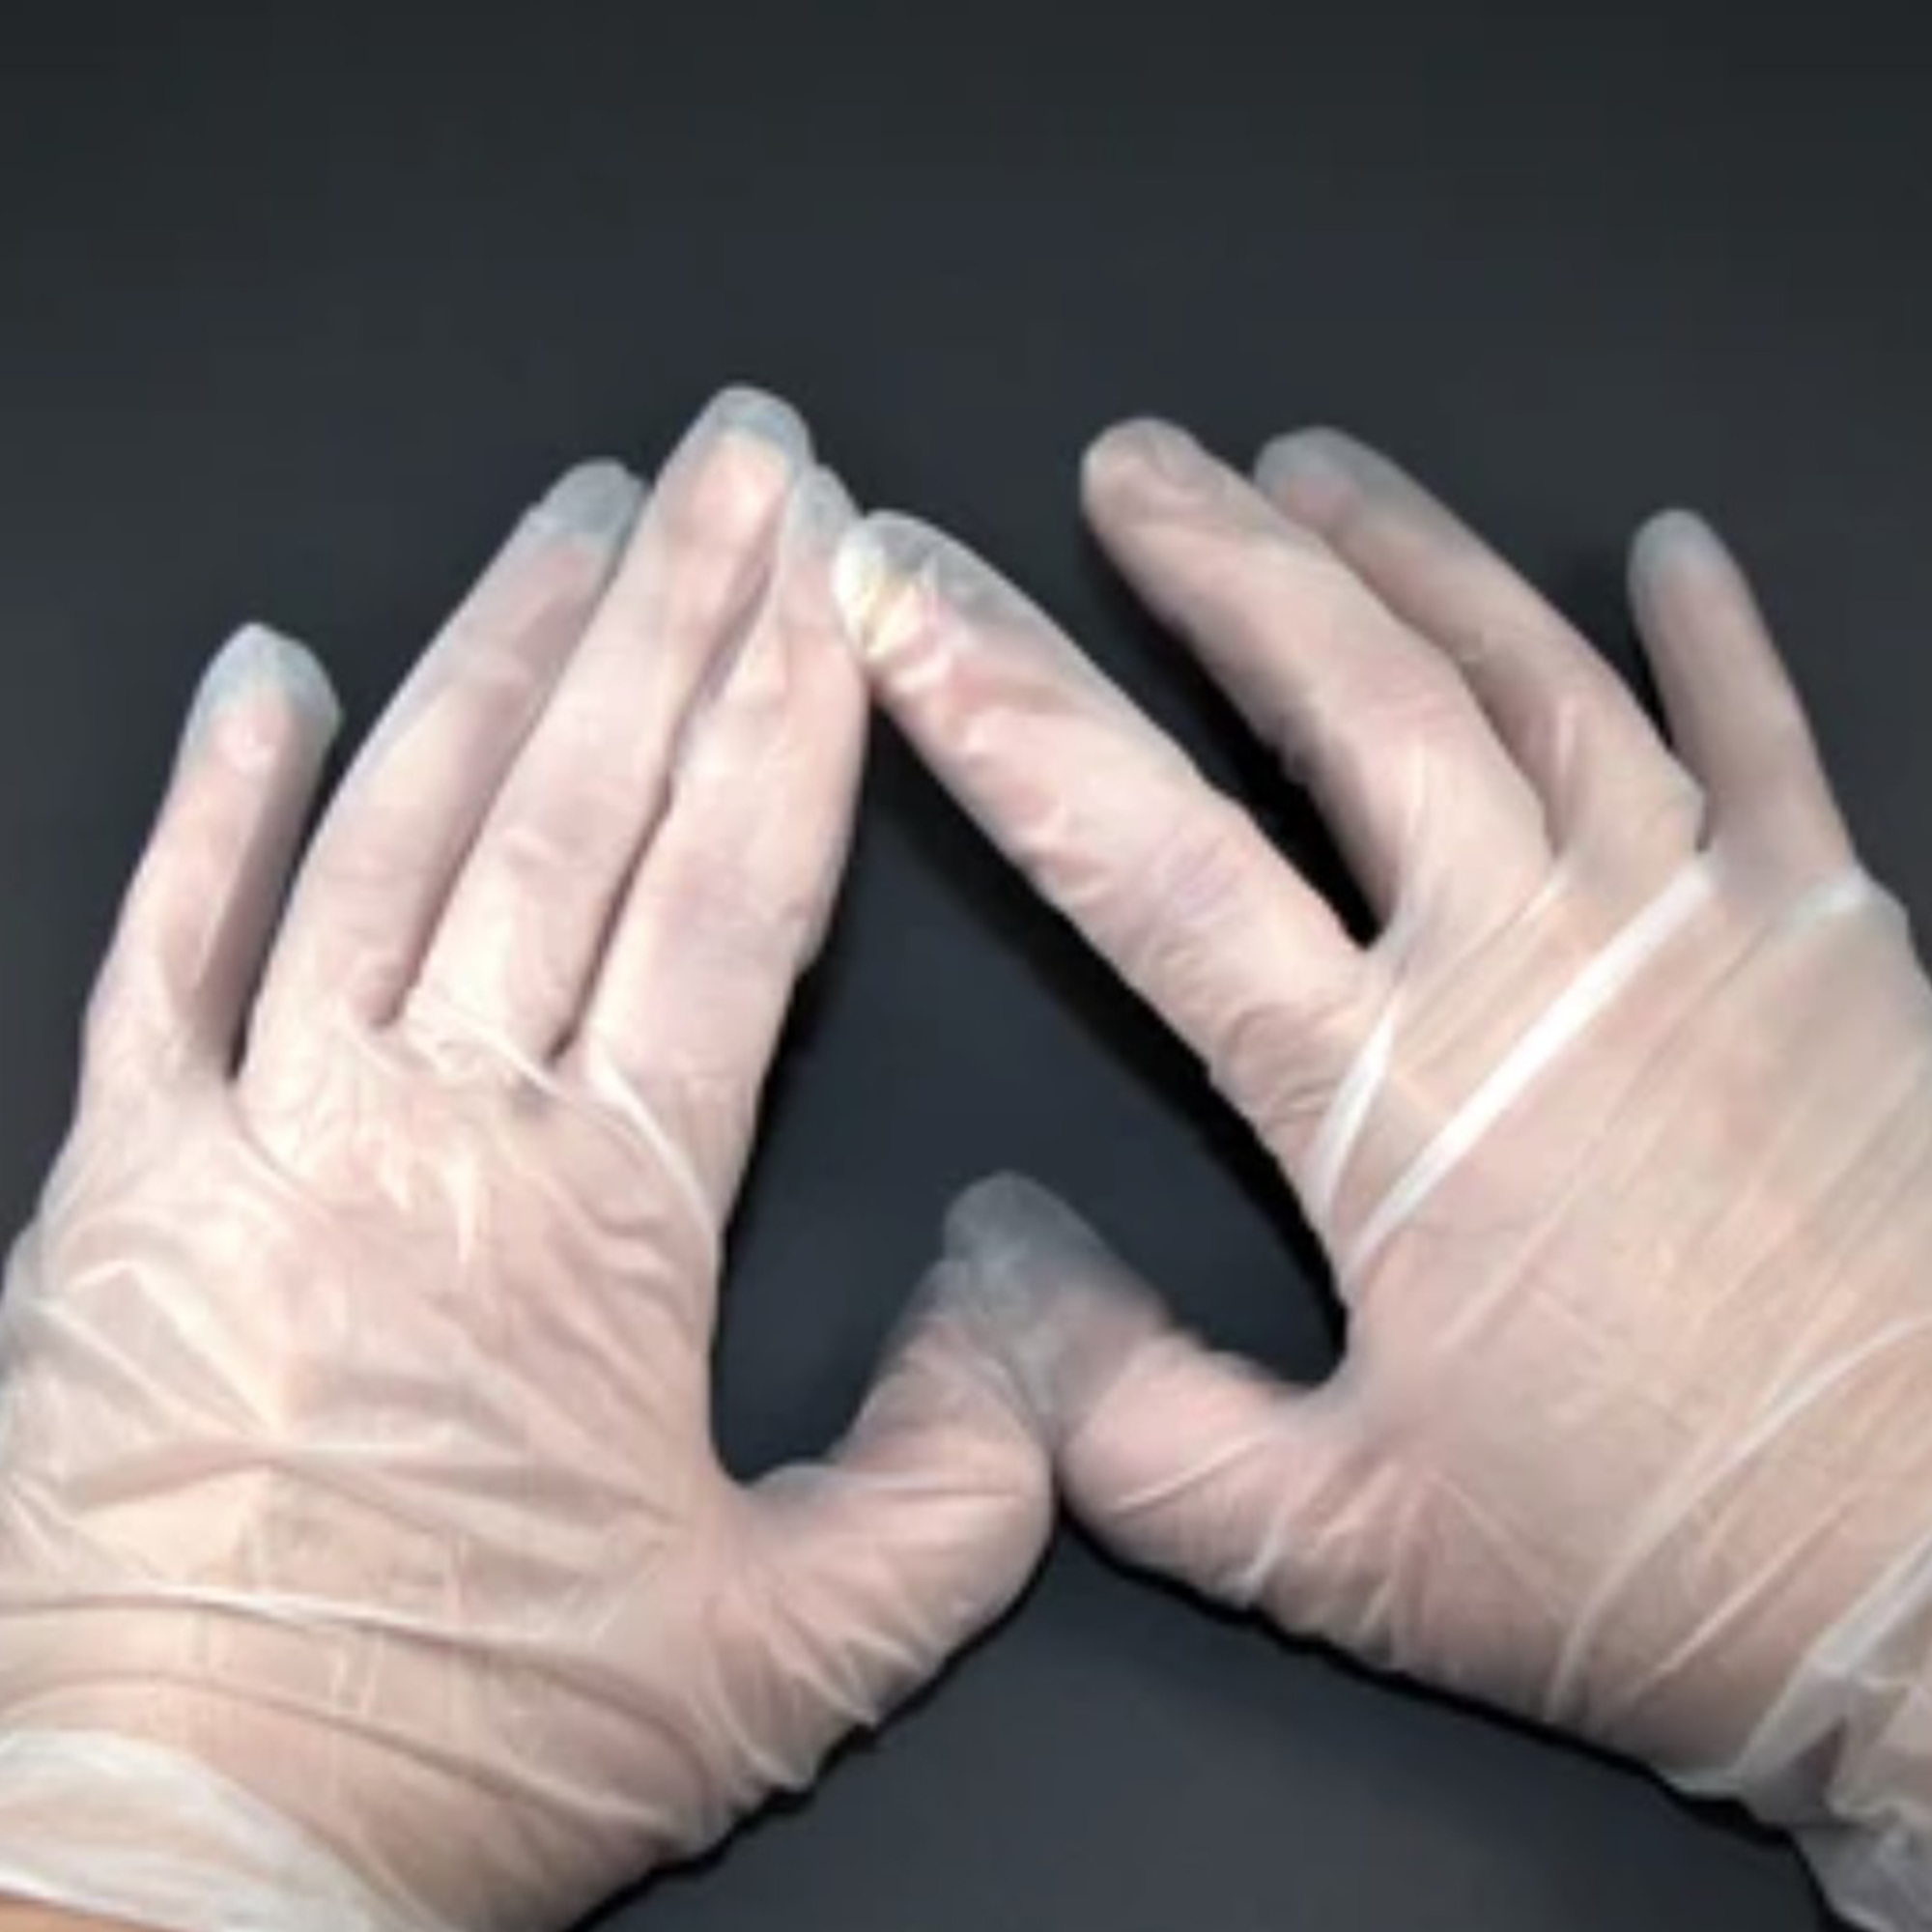 Medical practice/MEDICAL EXAMINATION AND SURGICAL GLOVES/Vinyl Medical Examination Gloves